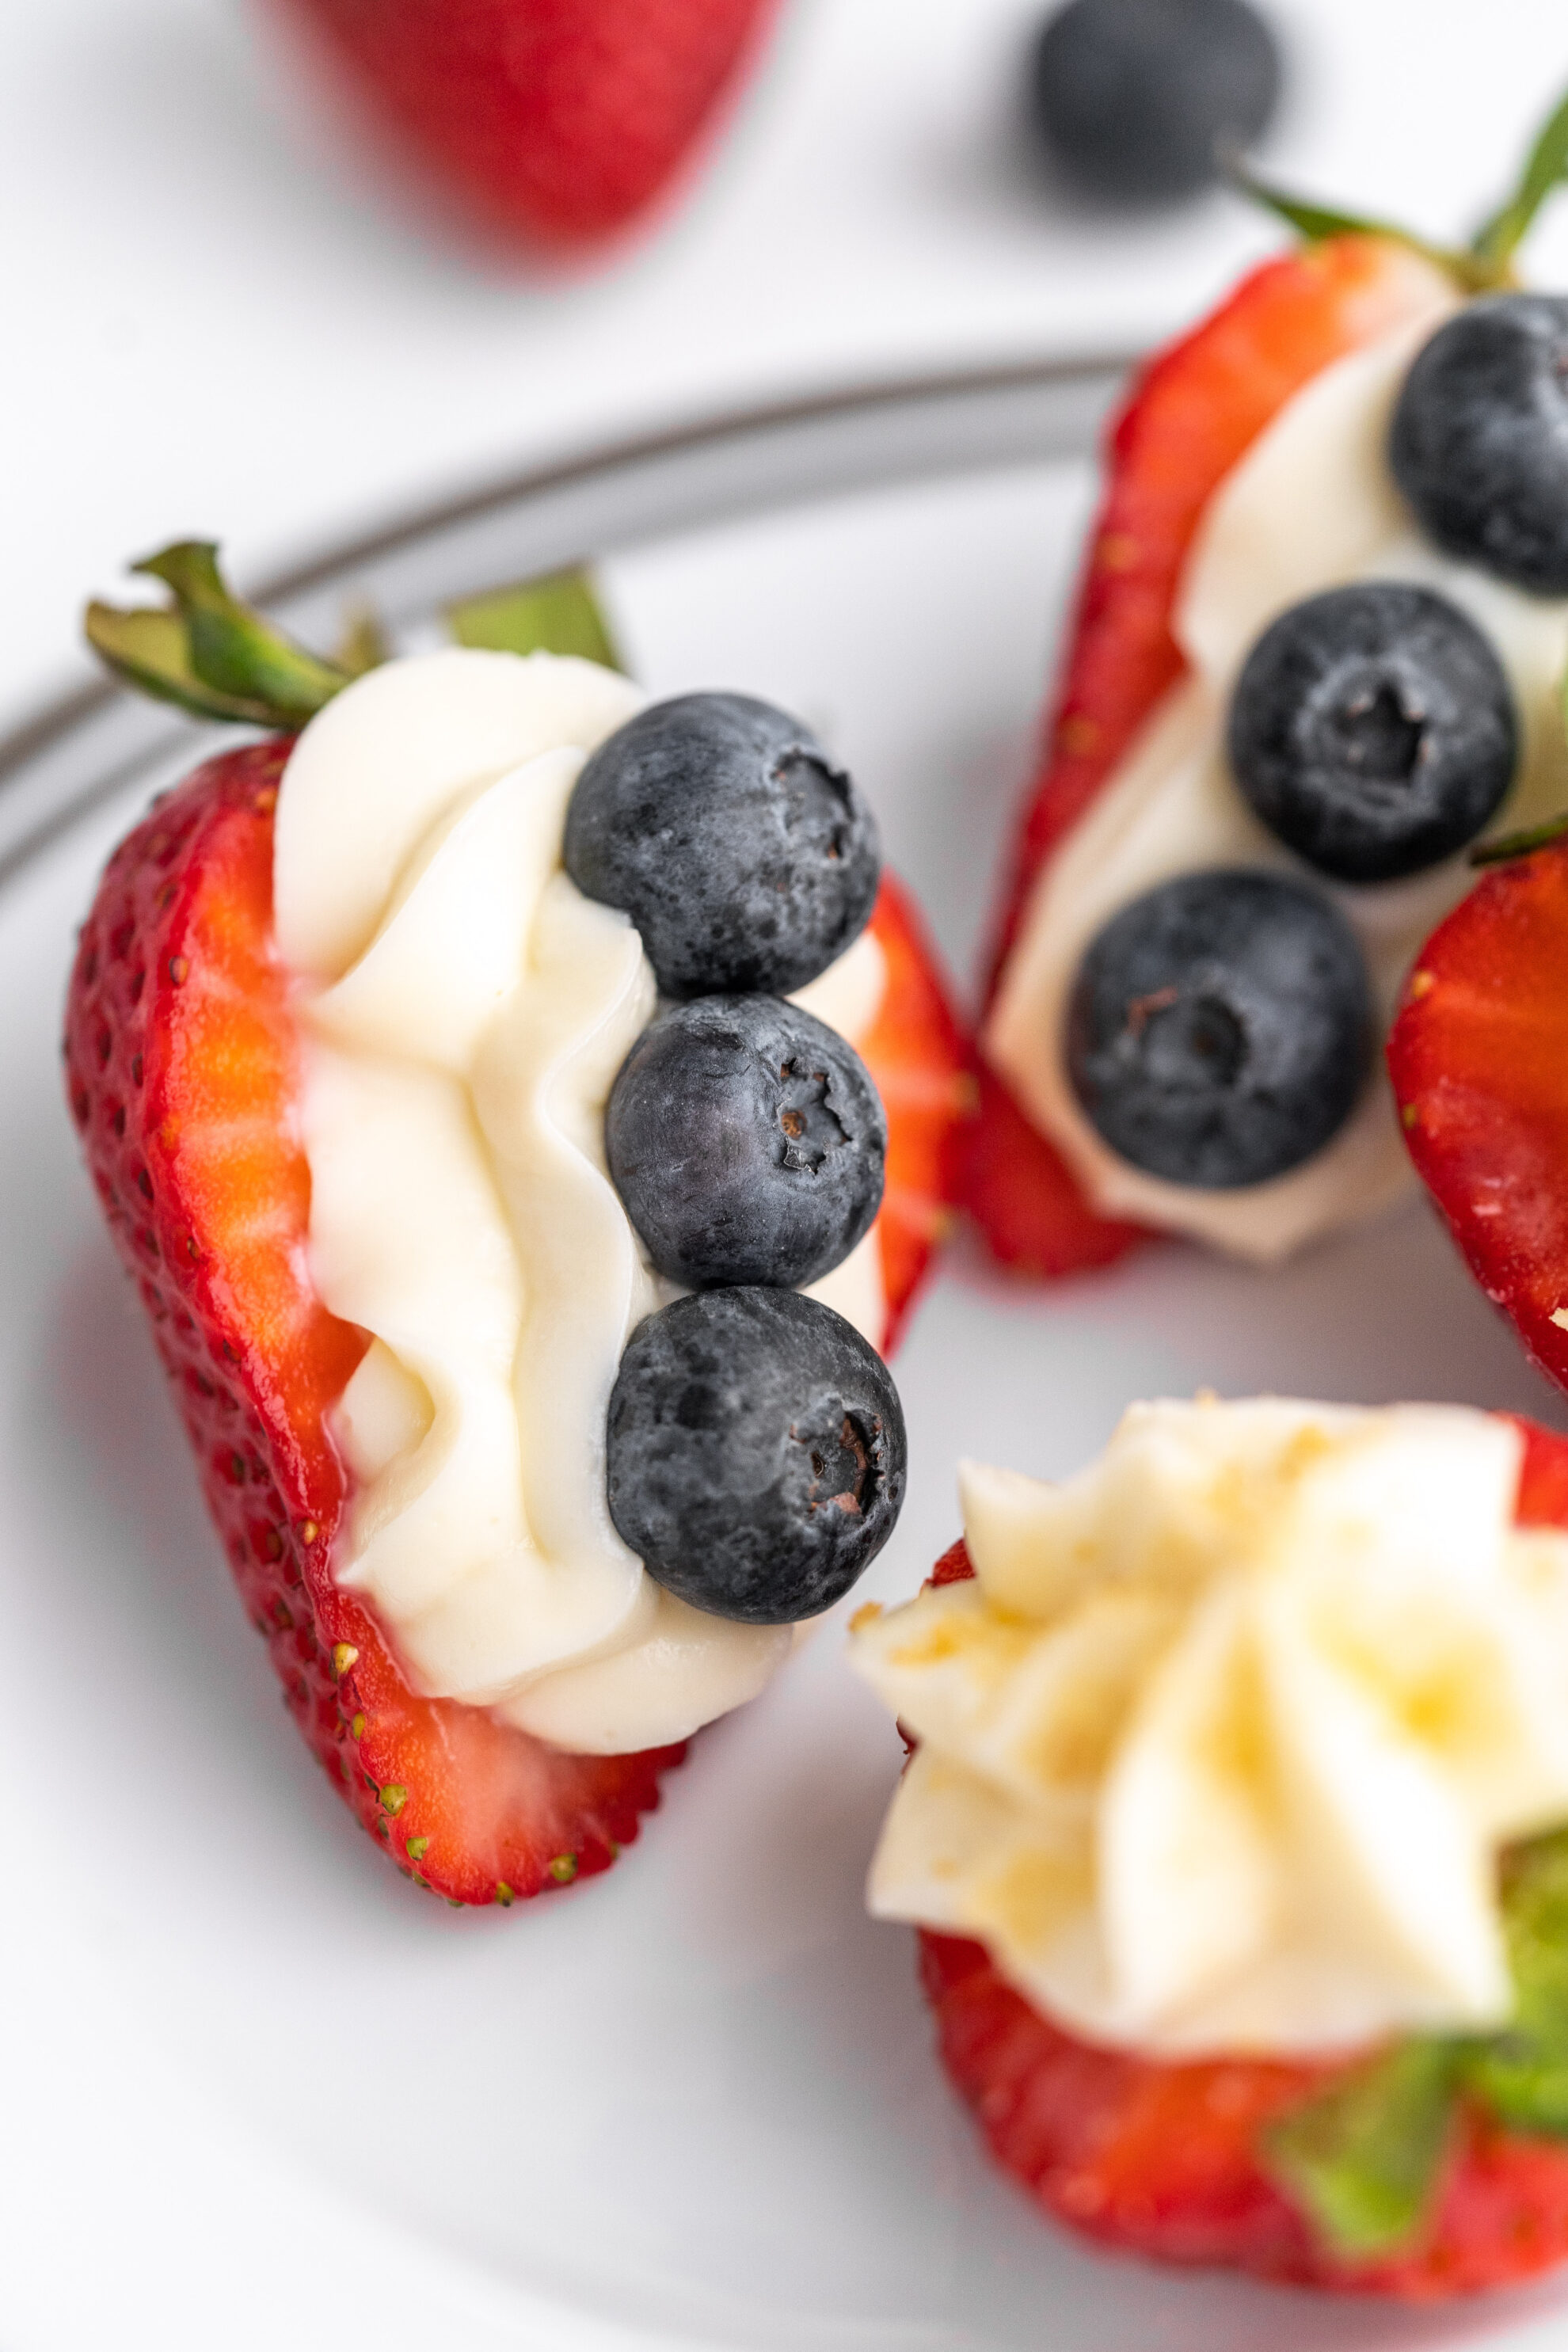 cream stuffed strawberries recipe with blueberries sitting on a white plate